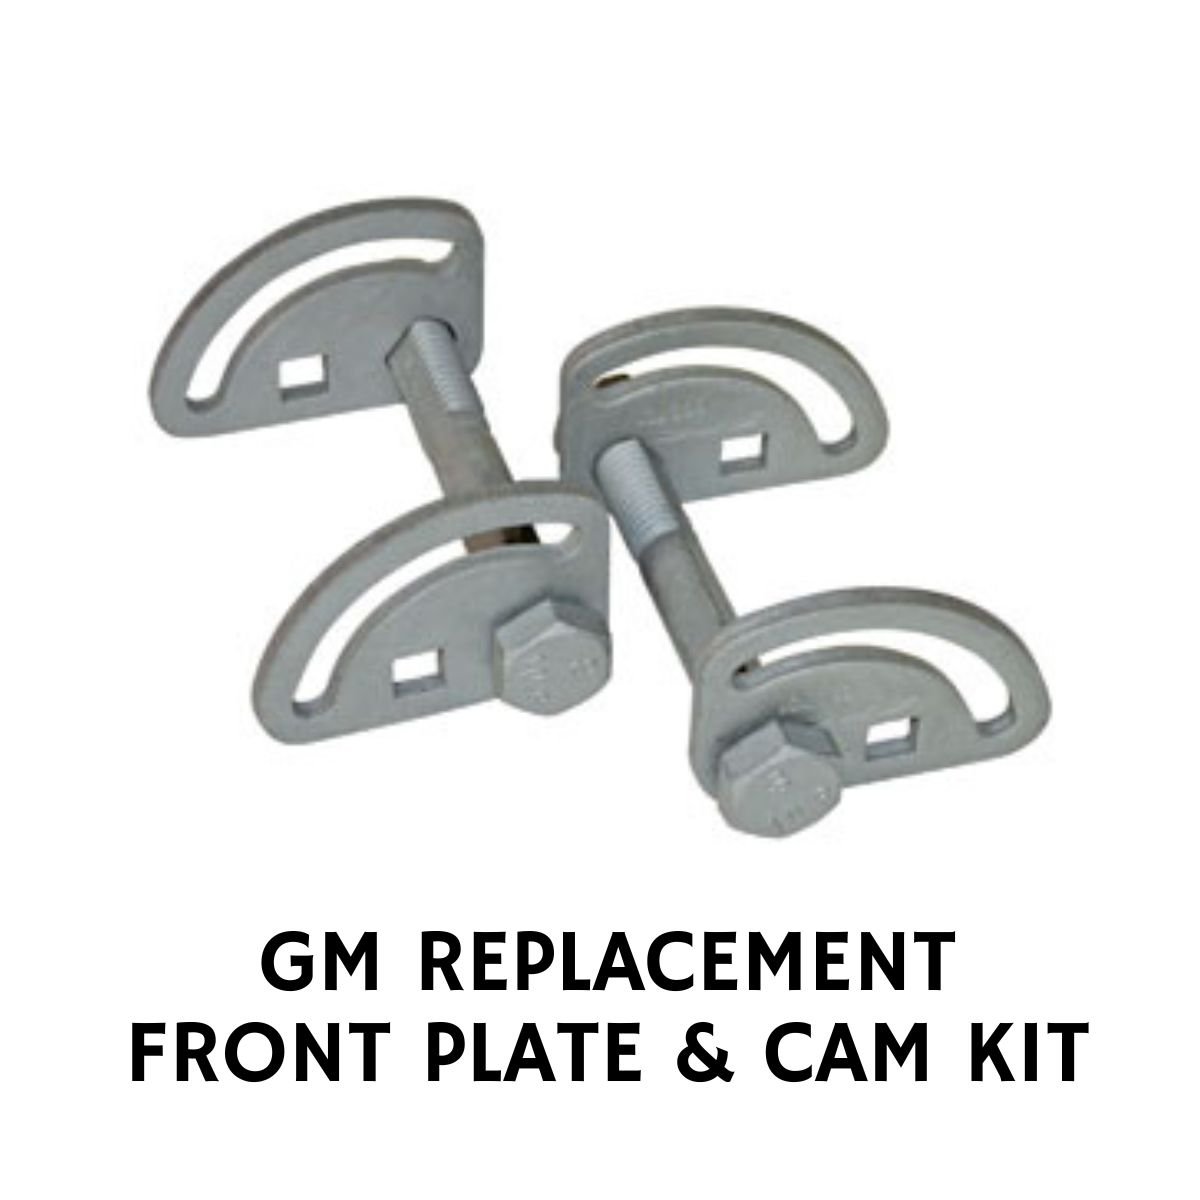 GM REPLACEMENT FRONT PLATE AND CAM KIT